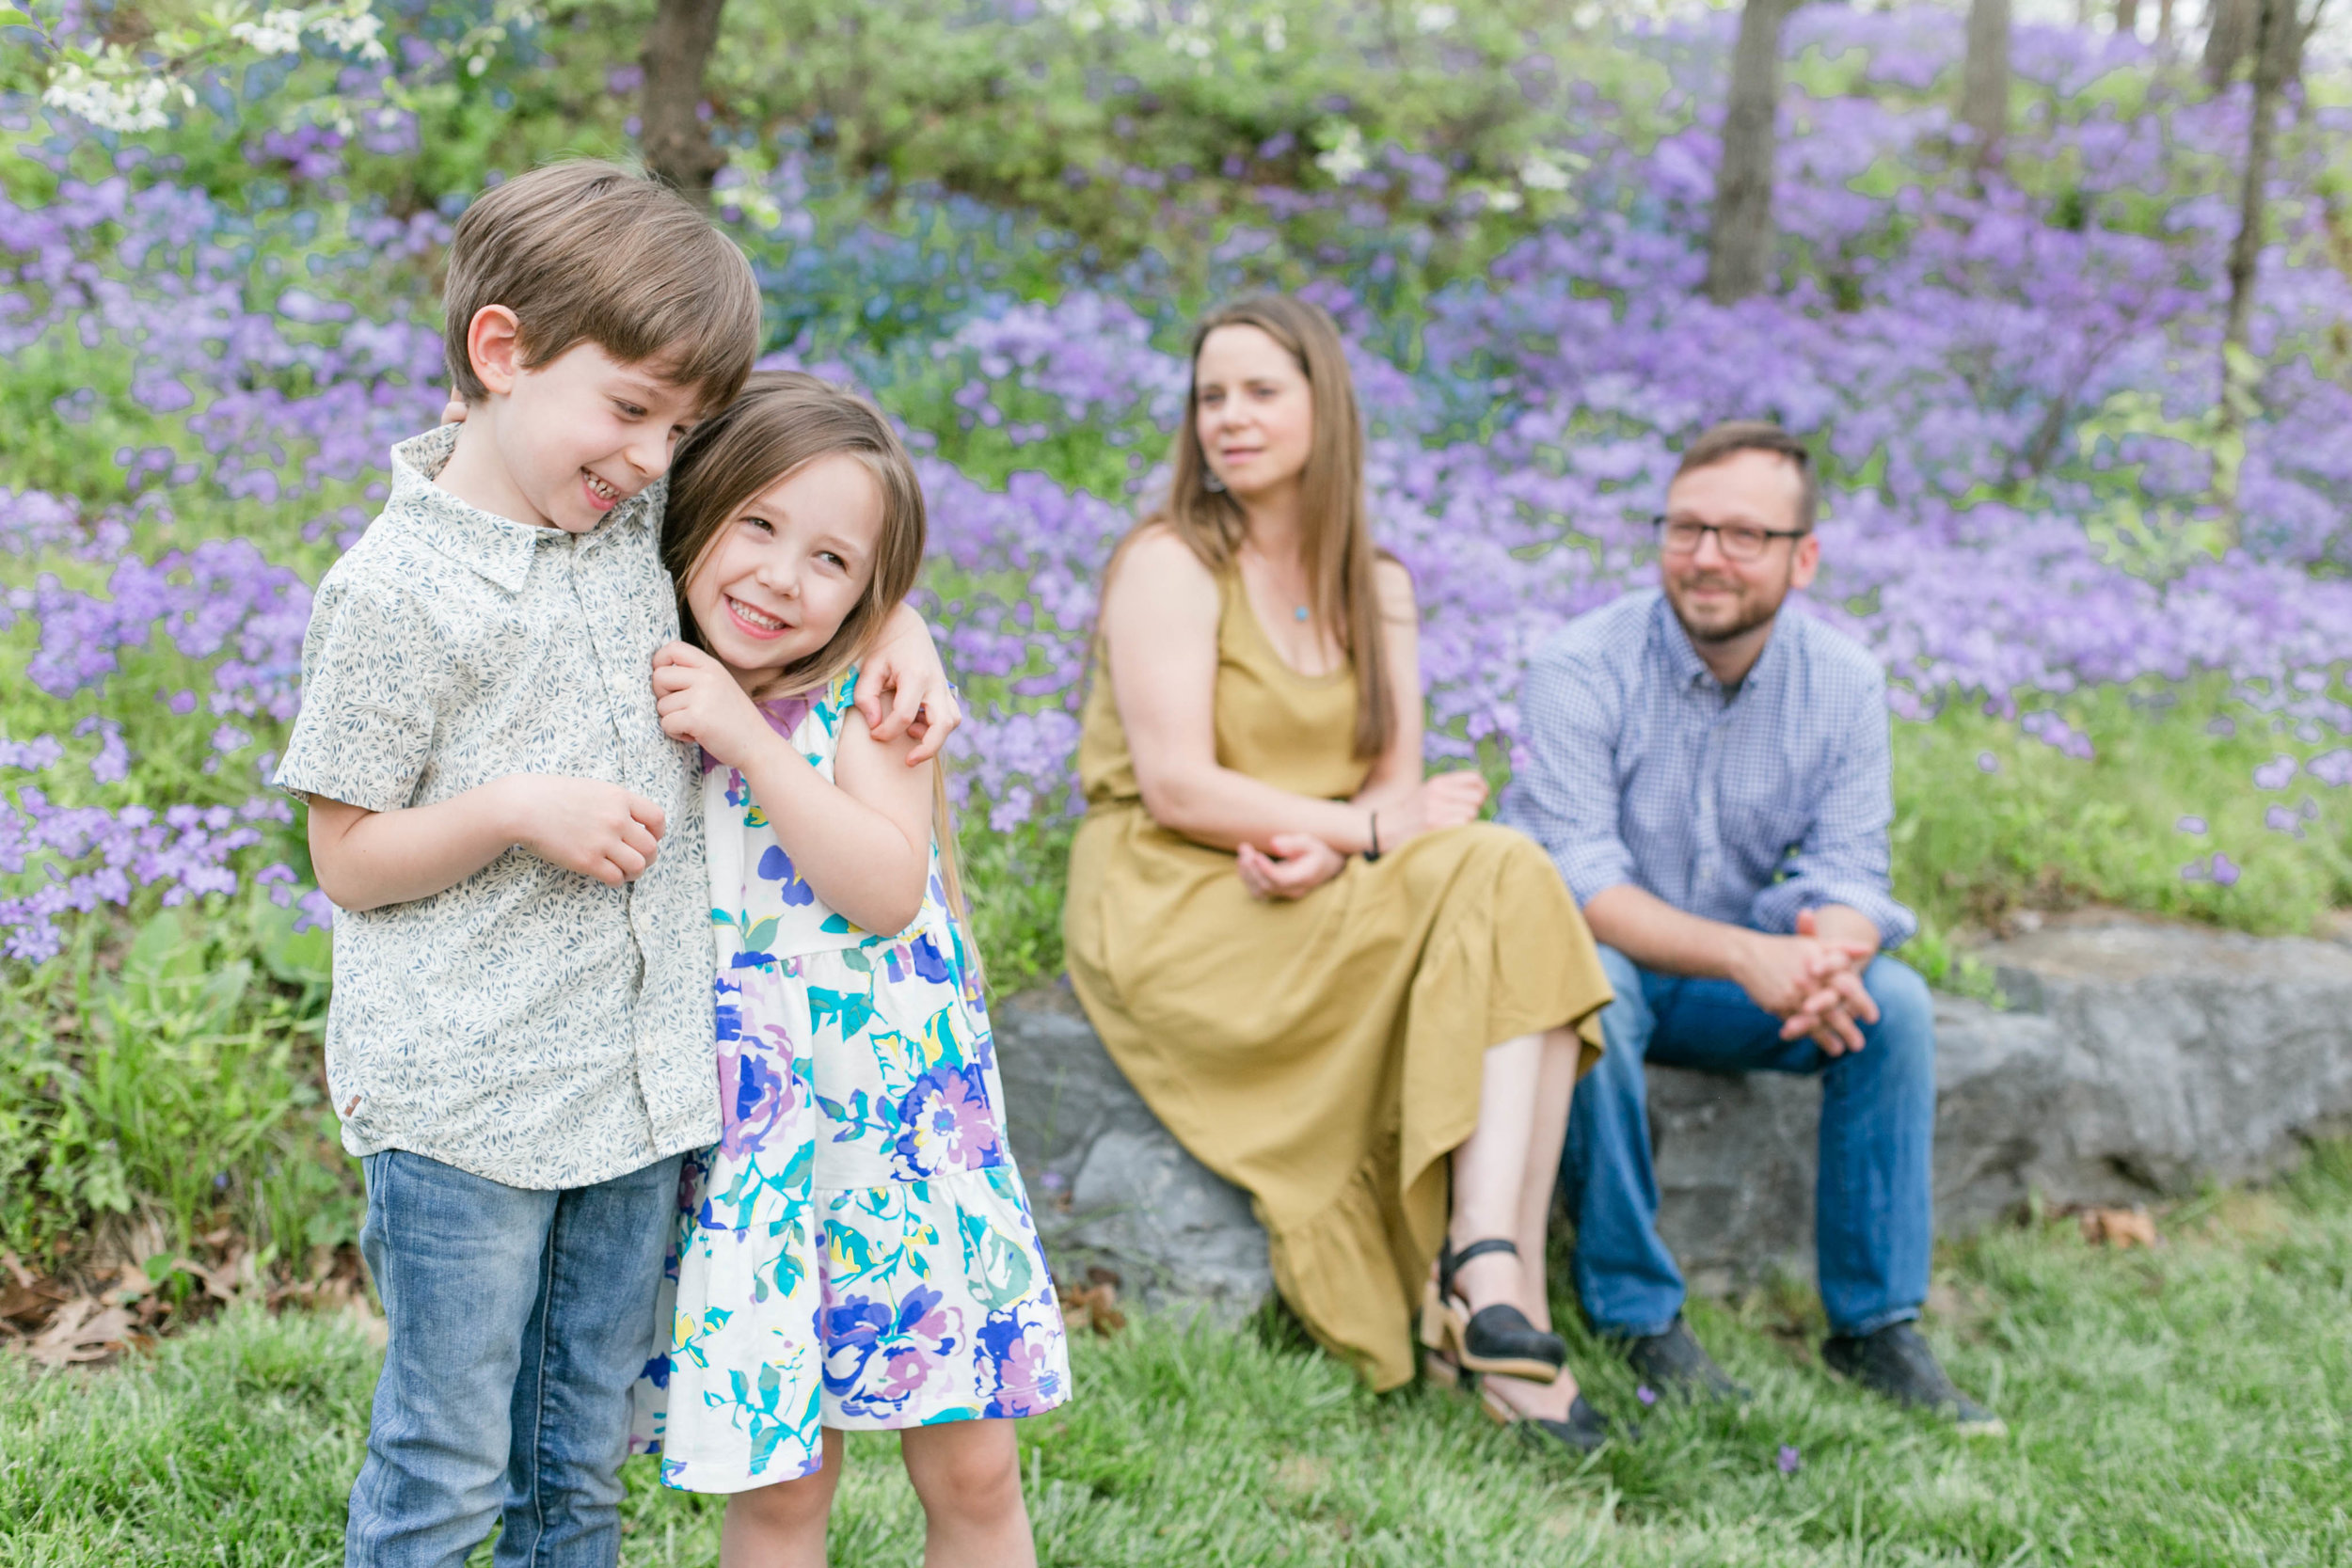 East Tennessee photography, Johnson City, Tri Cities, Jonesborough, family session, spring, engagement, wedding photographer, anniversary photos, portraits, light and airy photography